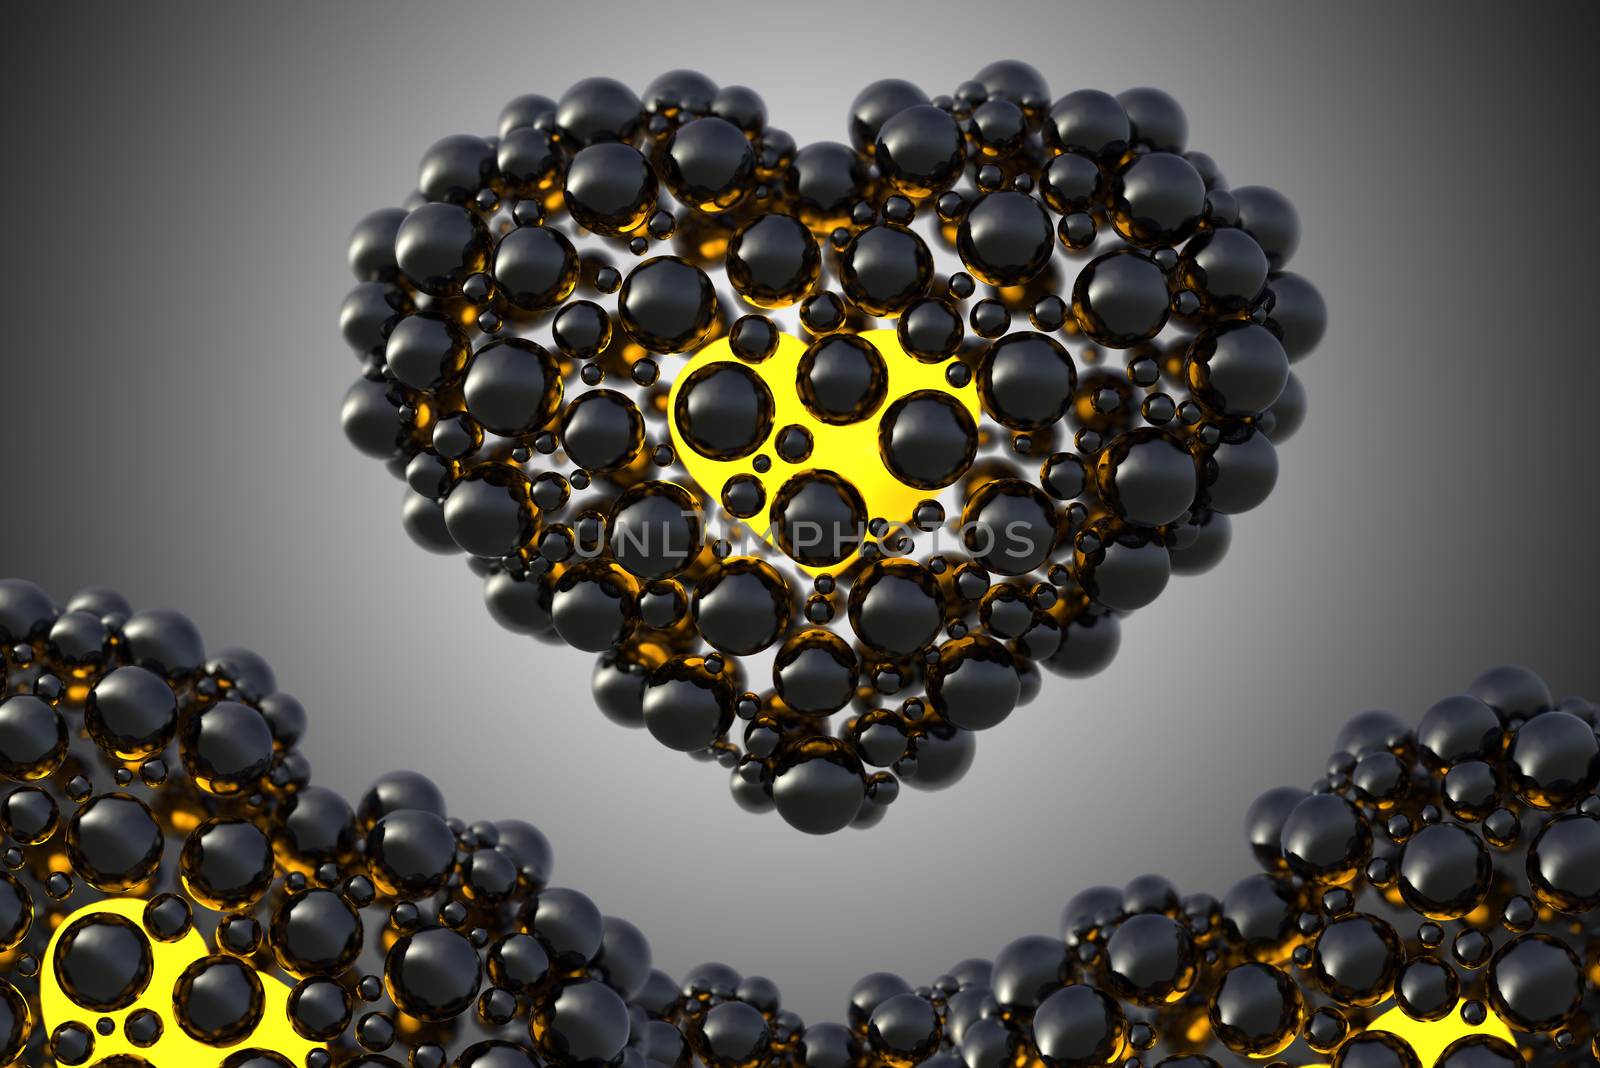 black heart made of spheres with reflections isolated on space background. Happy valentines day 3d illustration.